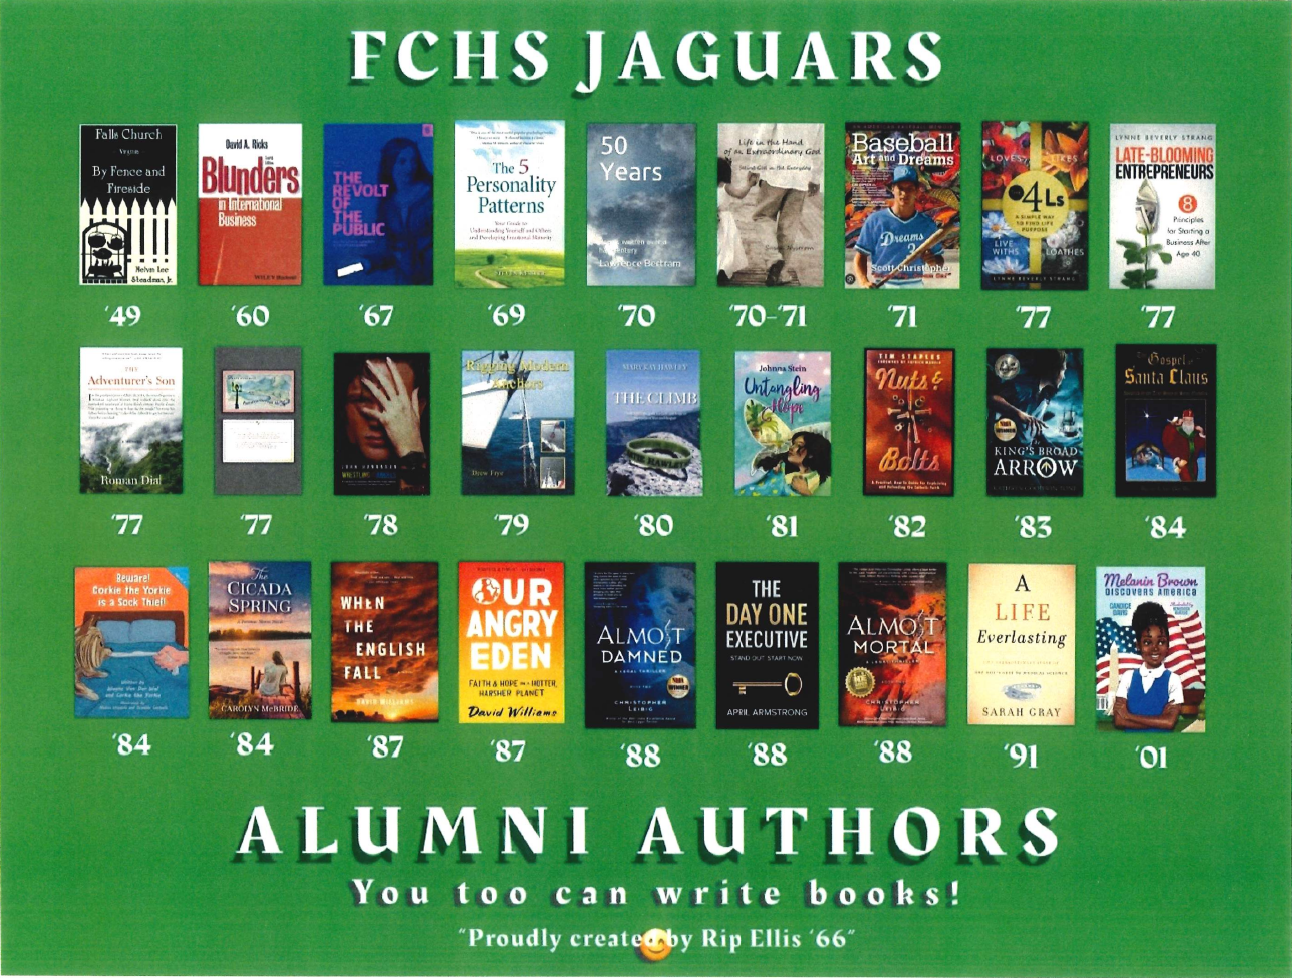 The published books of Falls Church HS' author-alums